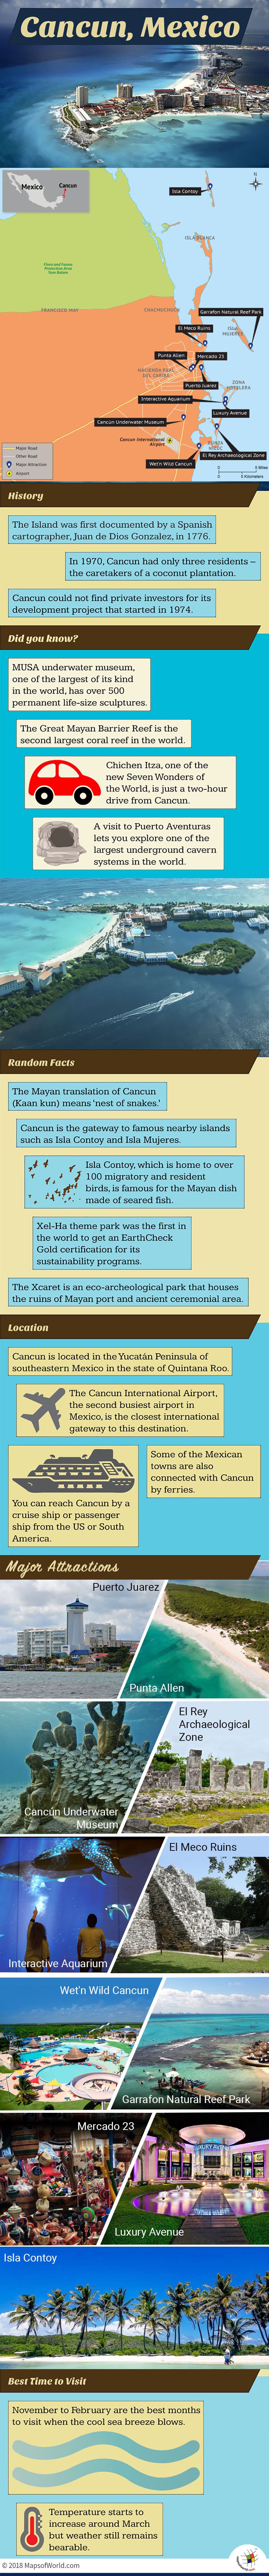 Infographic Depicting Cancún Tourist Attractions